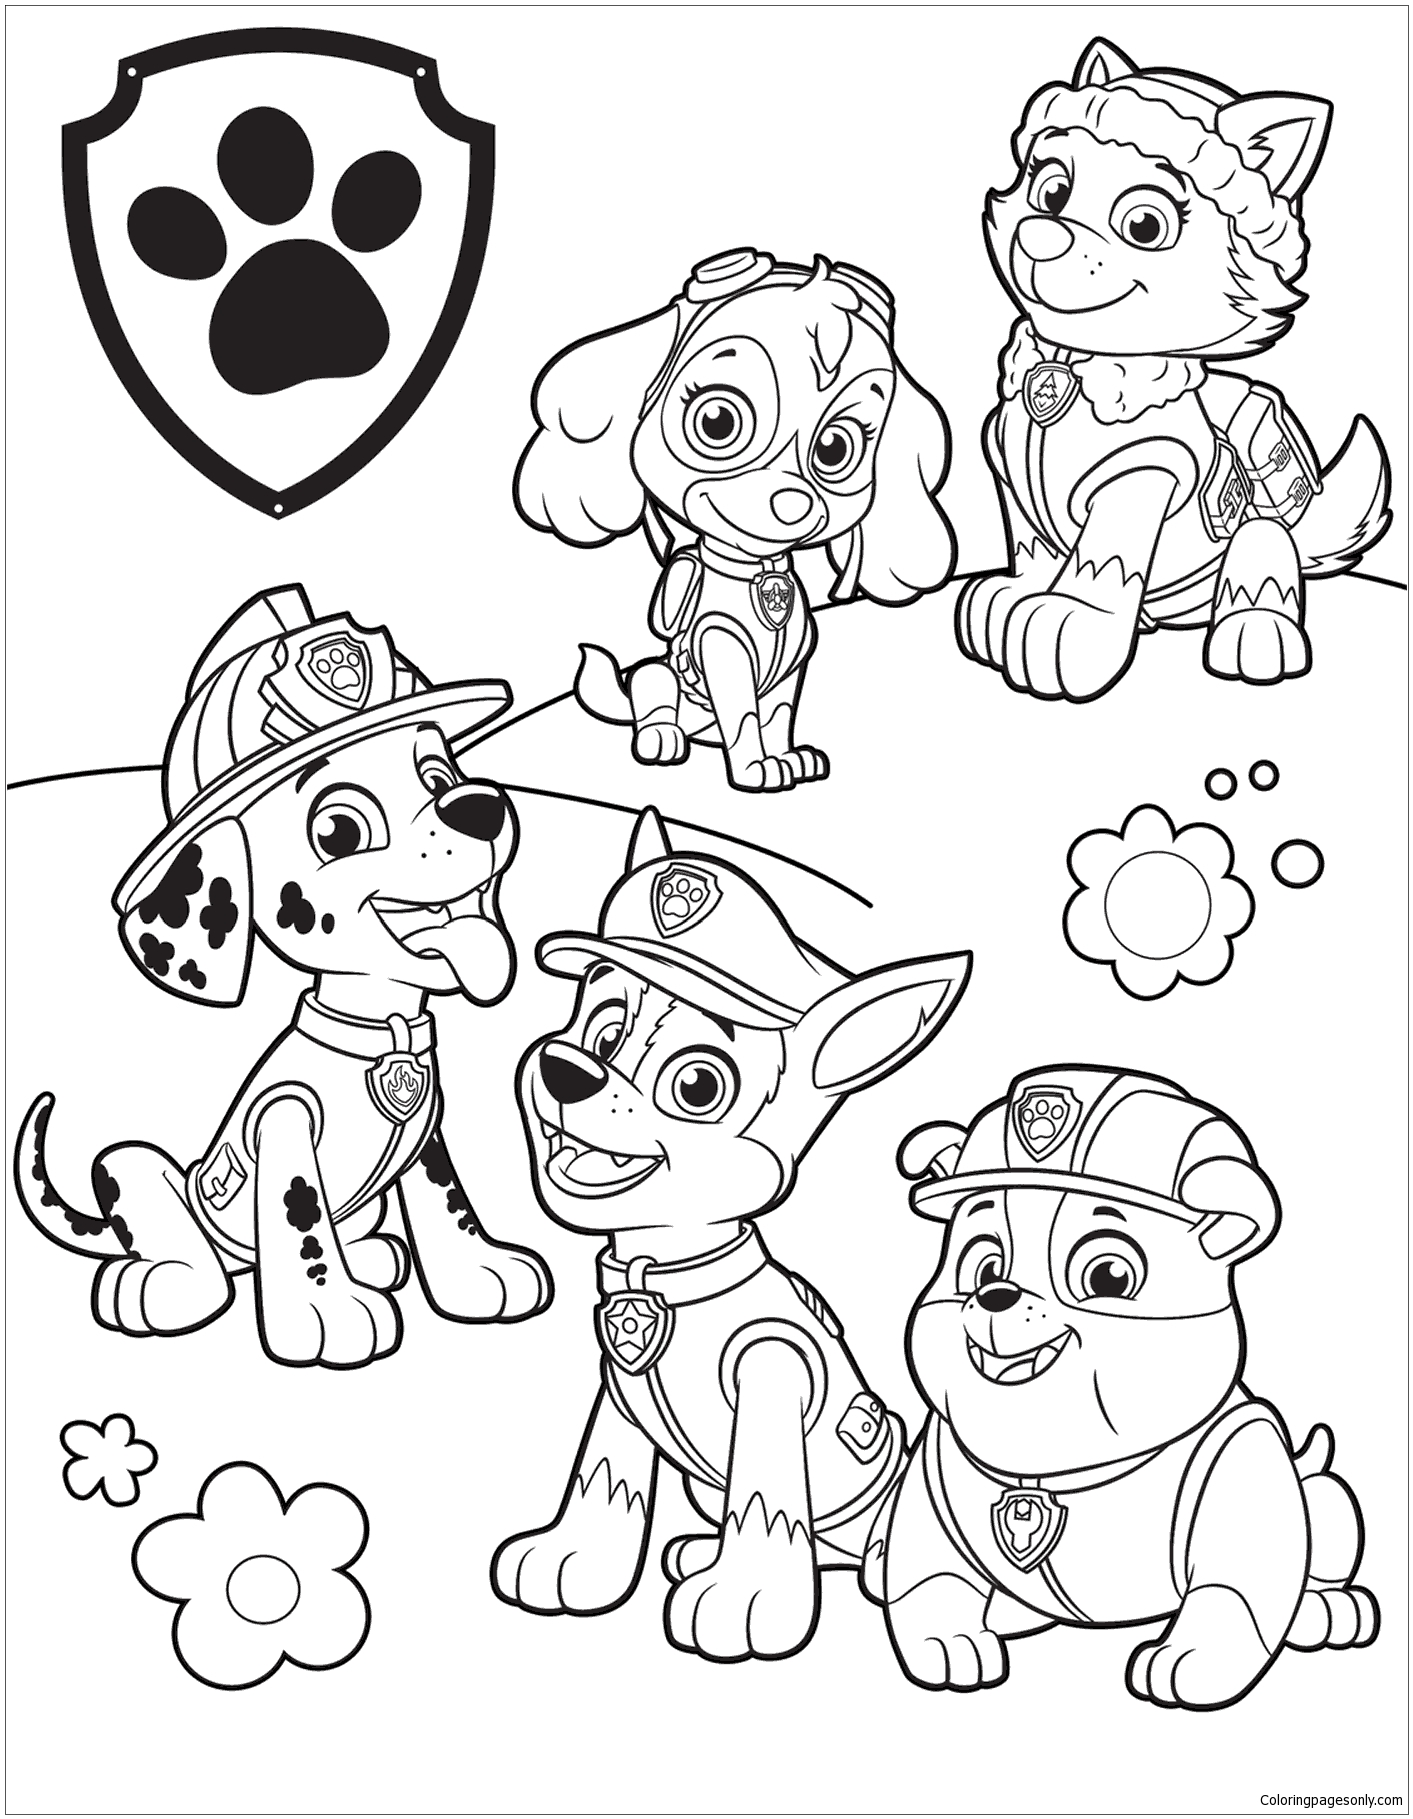 Paw Patrol 39 Coloring Page Free Coloring Pages Online